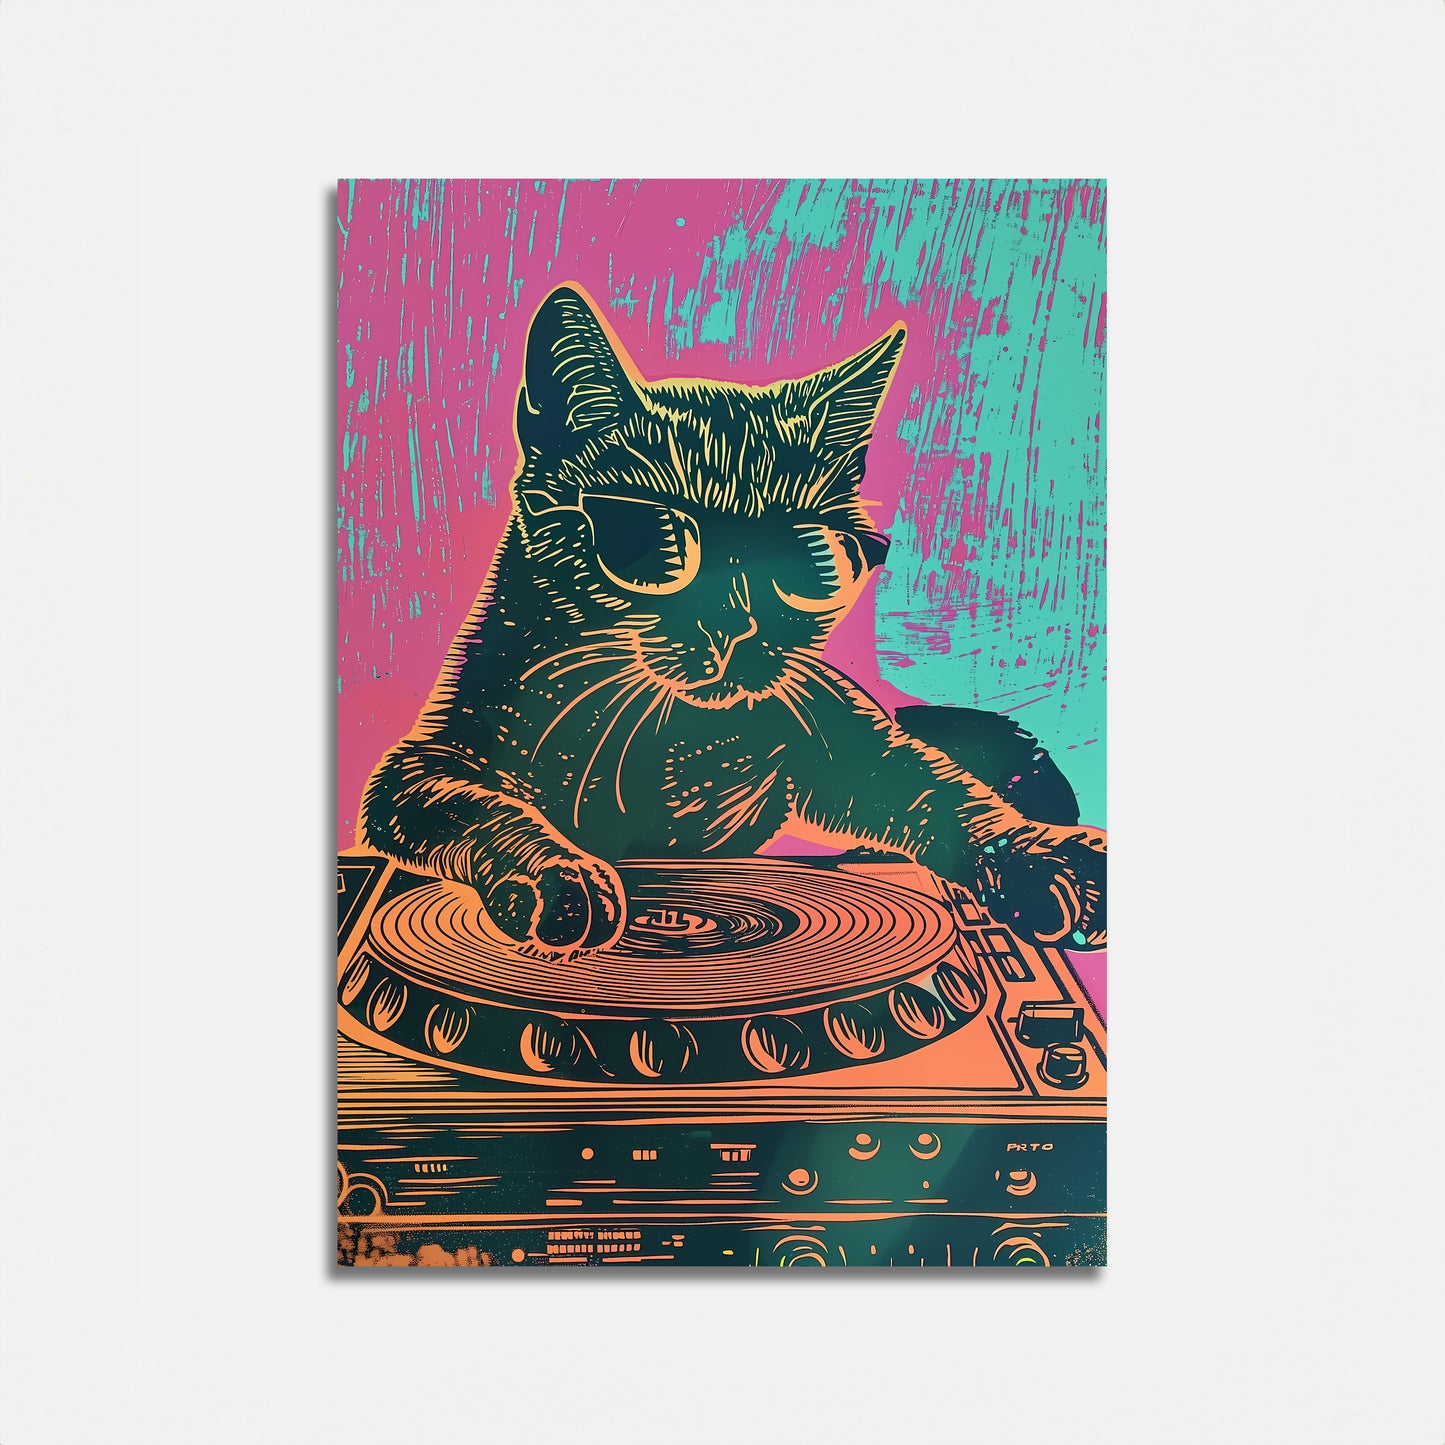 Colorful illustration of a cat DJing on turntables.